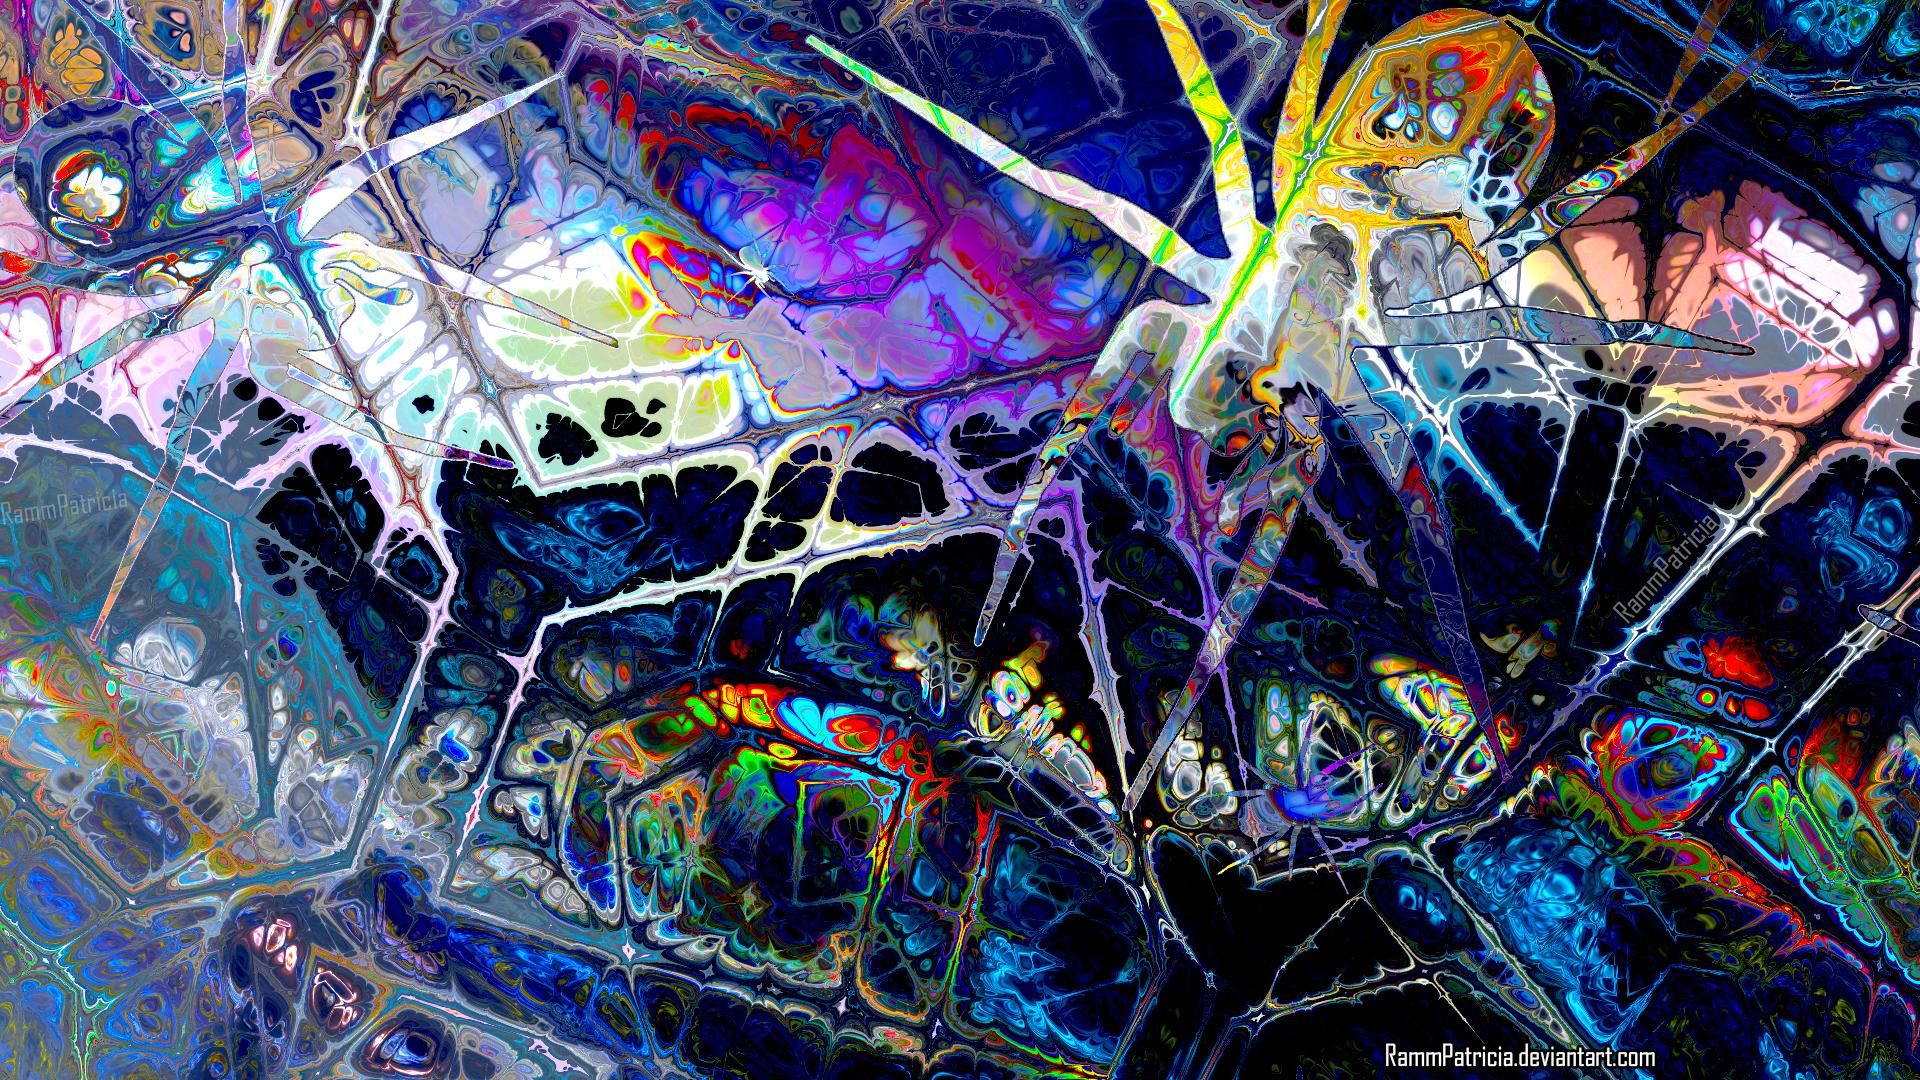 HD wallpaper, Digital Art, Spider, Psychedelic, Abstract, Iridescent, Tarantula, Watermarked, Colorful, Trippy, Rammpatricia